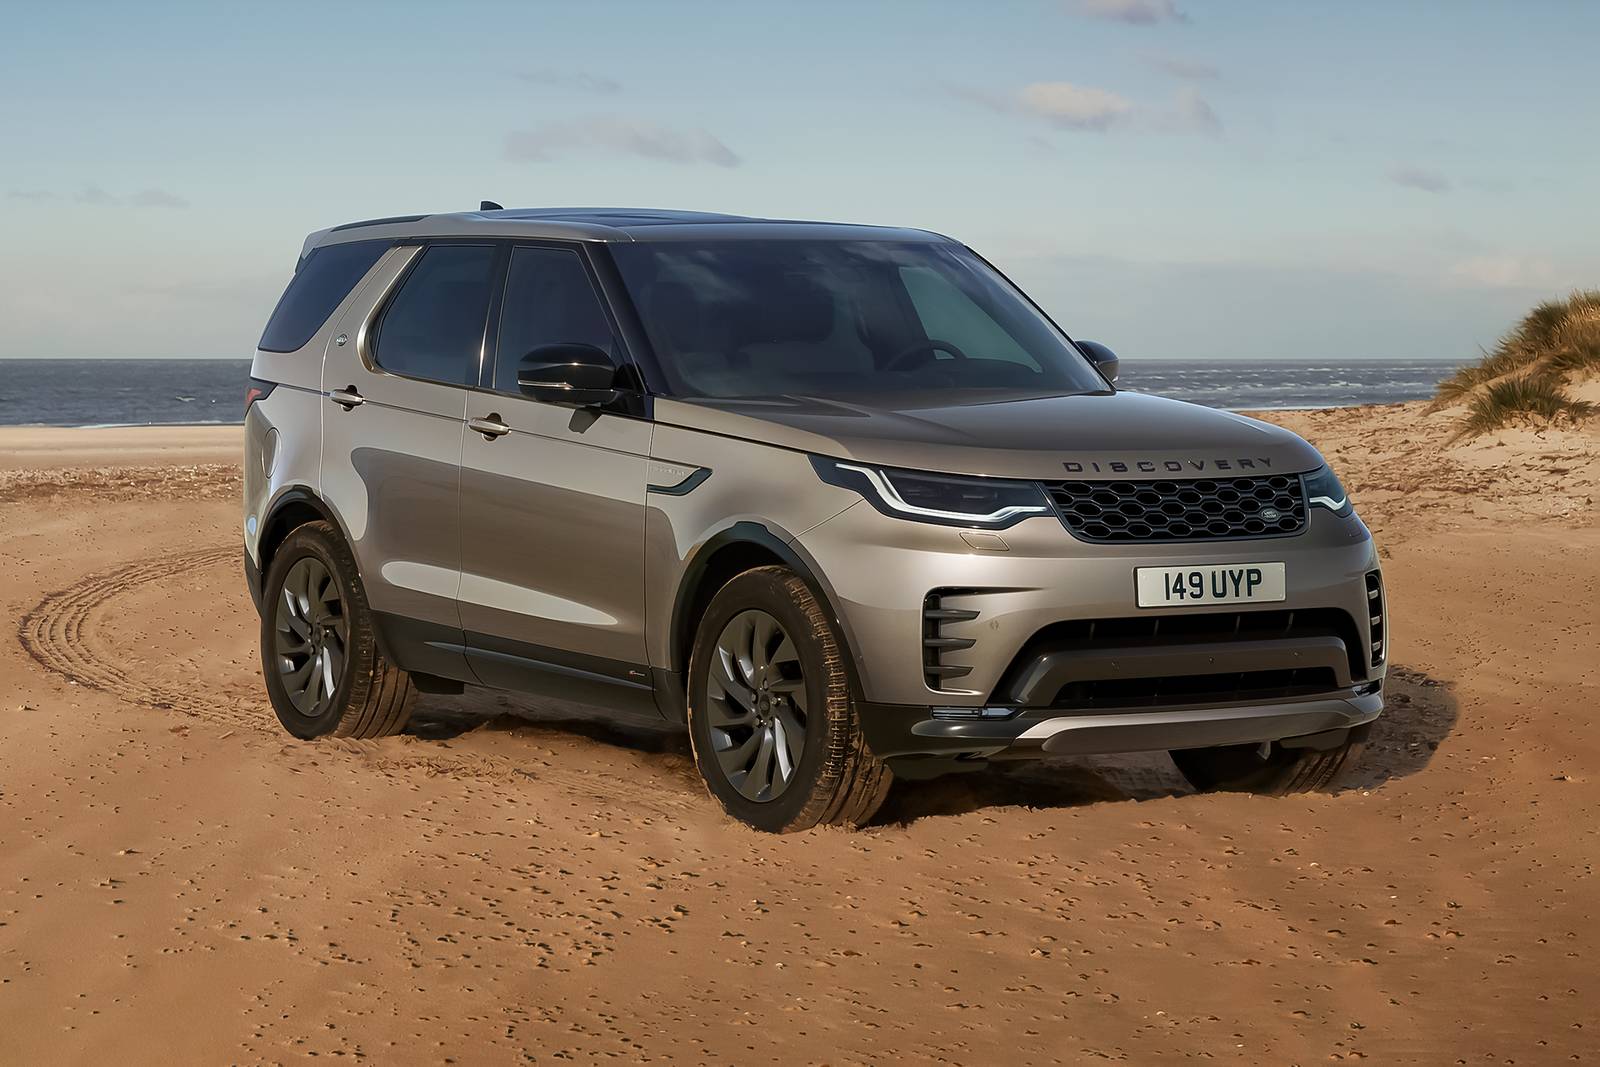 LAND ROVER DISCOVERY S V8 ▶ Impuesto Vehicular ≫